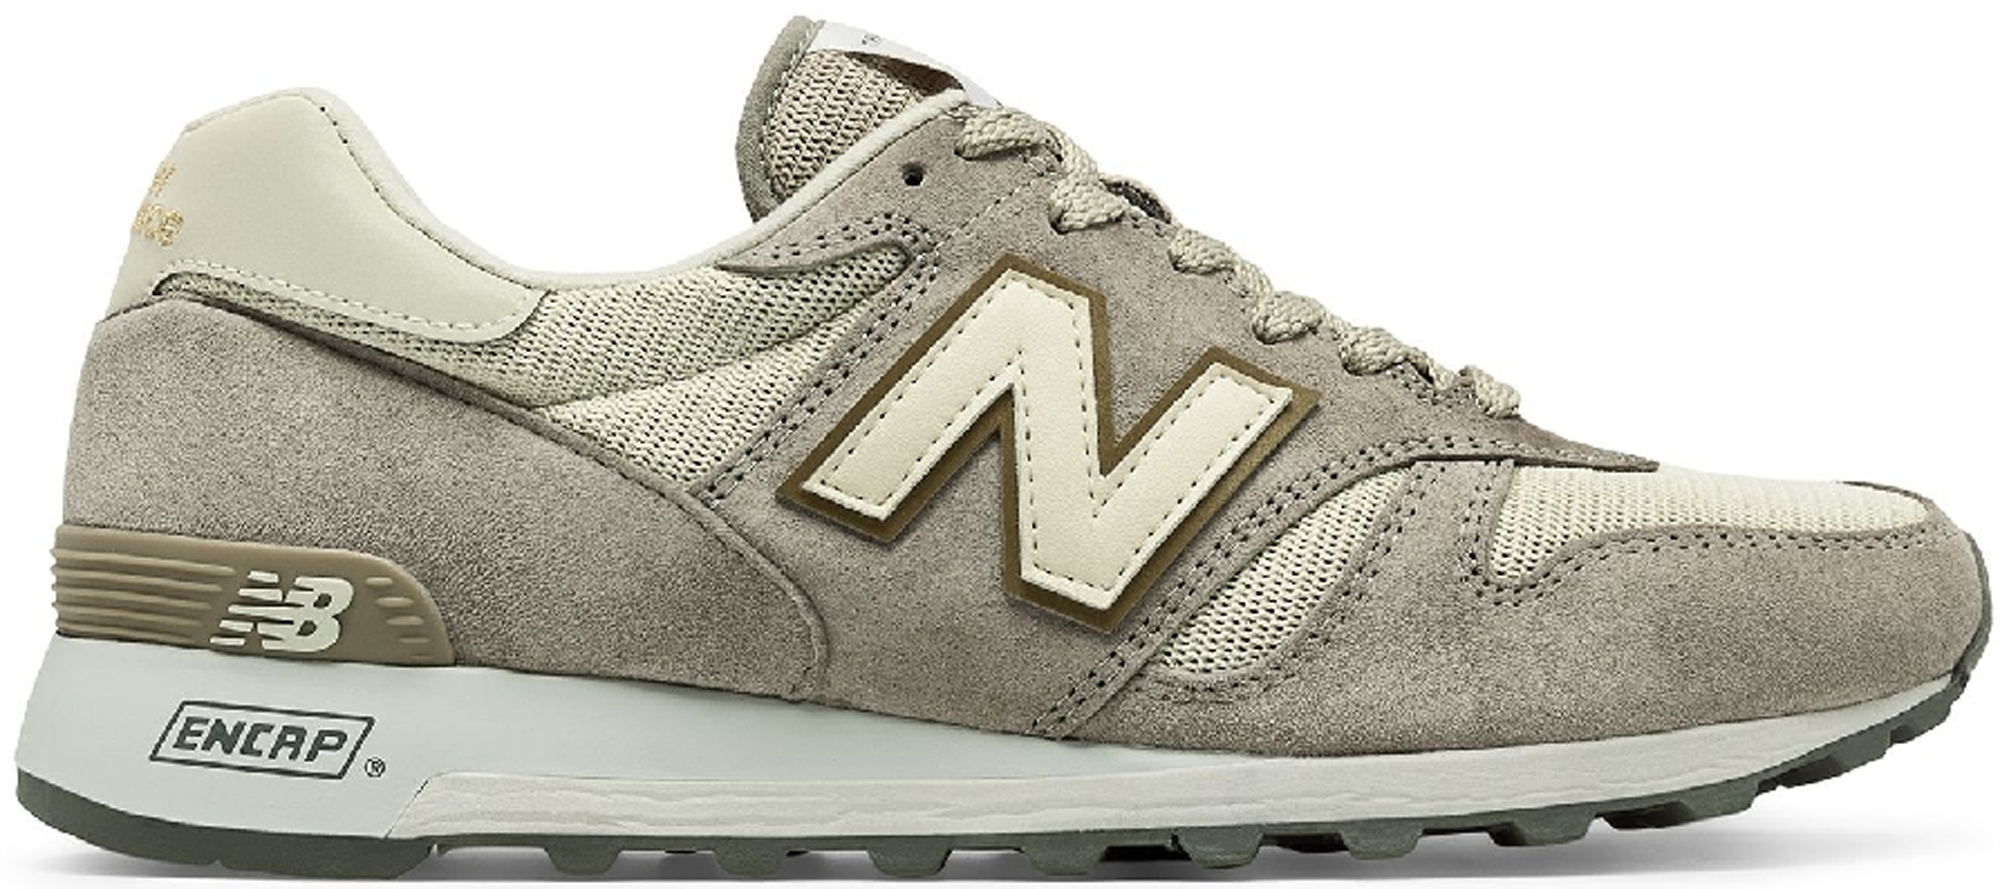 new balance grey and gold